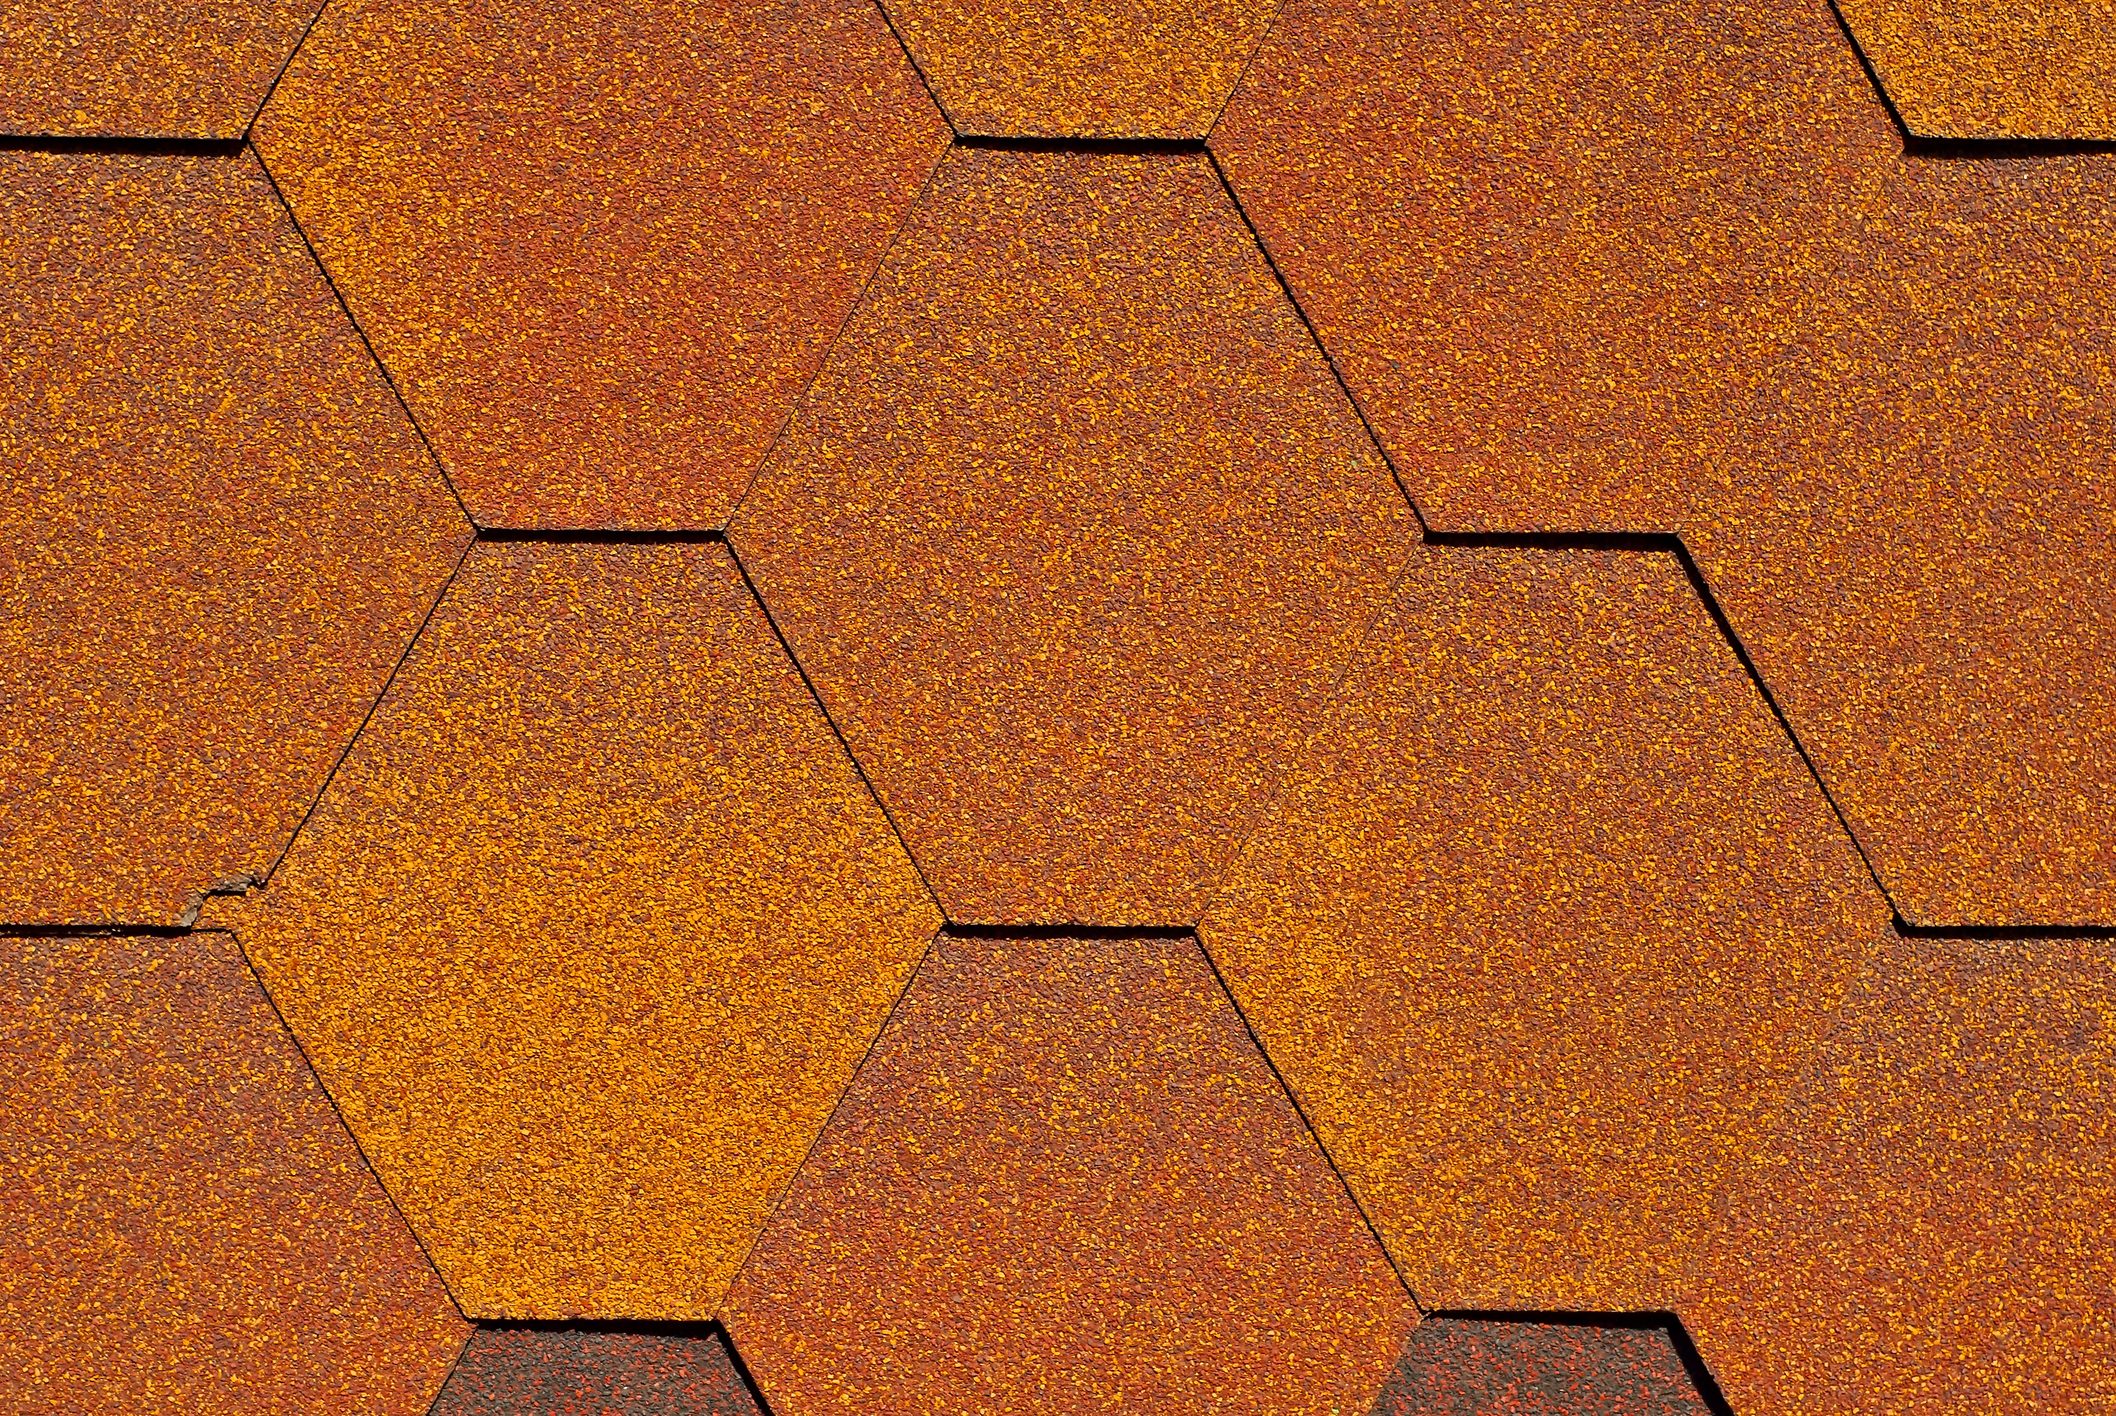 Flexible tile is made of fiberglass impregnated with bitumen. Texture of orange roof close up.